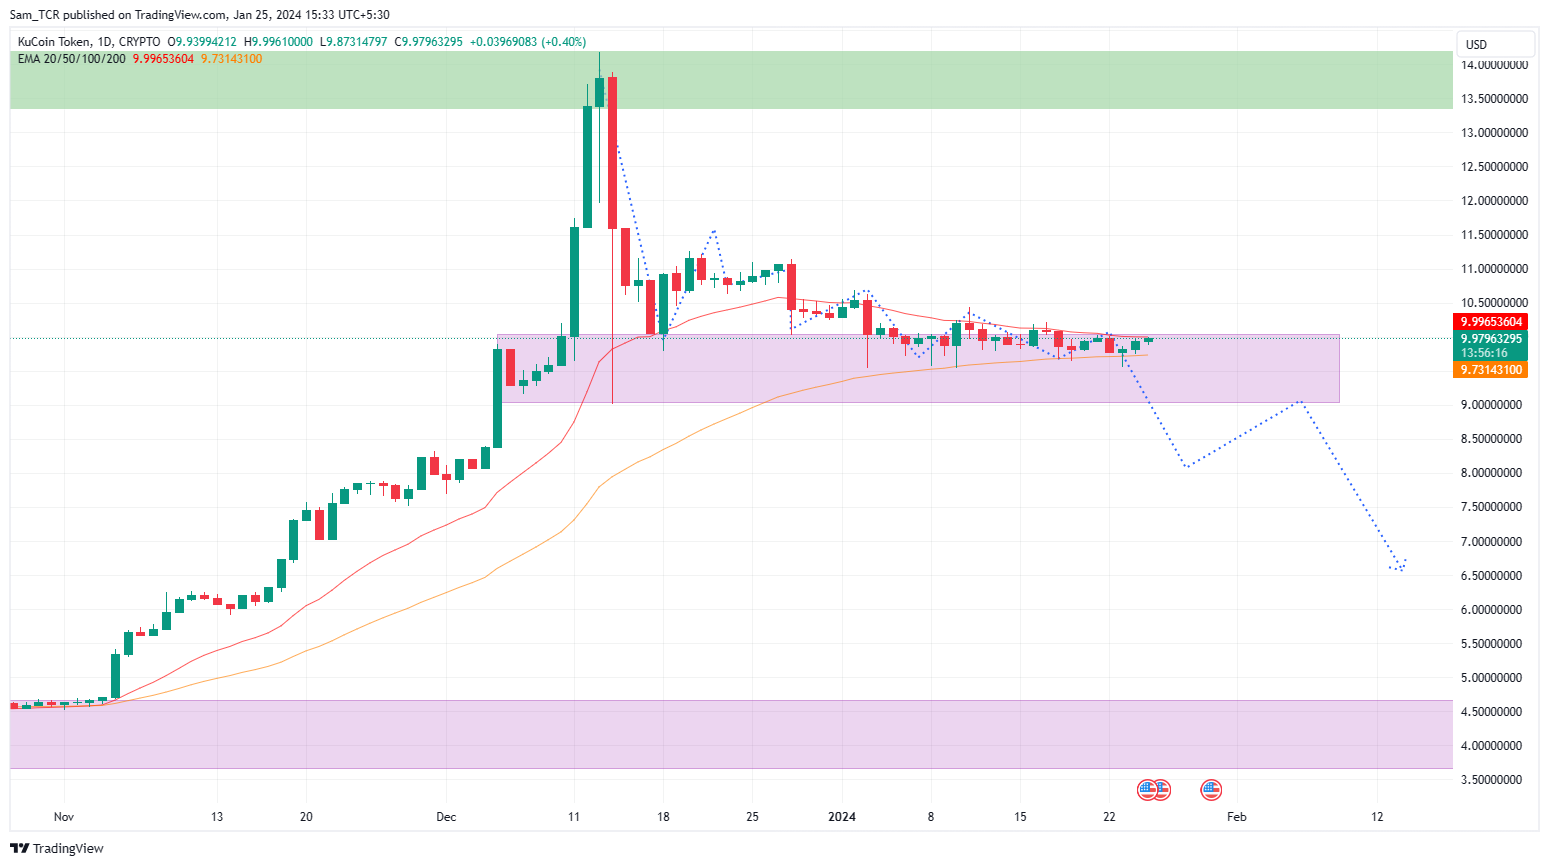 KuCoin Crypto: What To Expect From KCS Crypto Price Next?